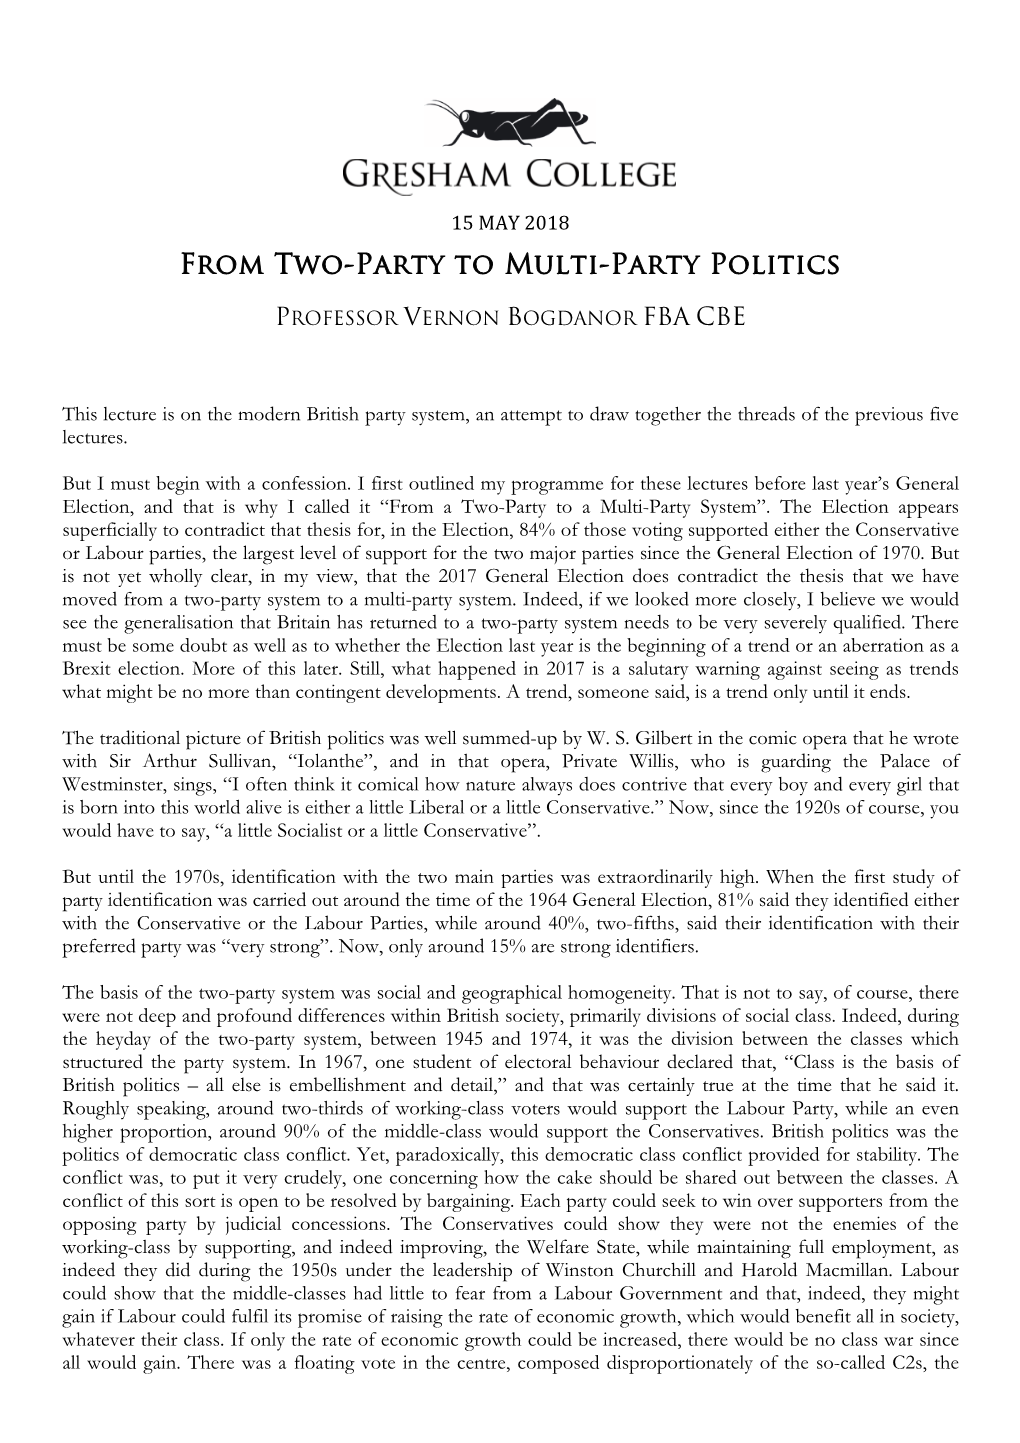 From Two-Party to Multi-Party Politics